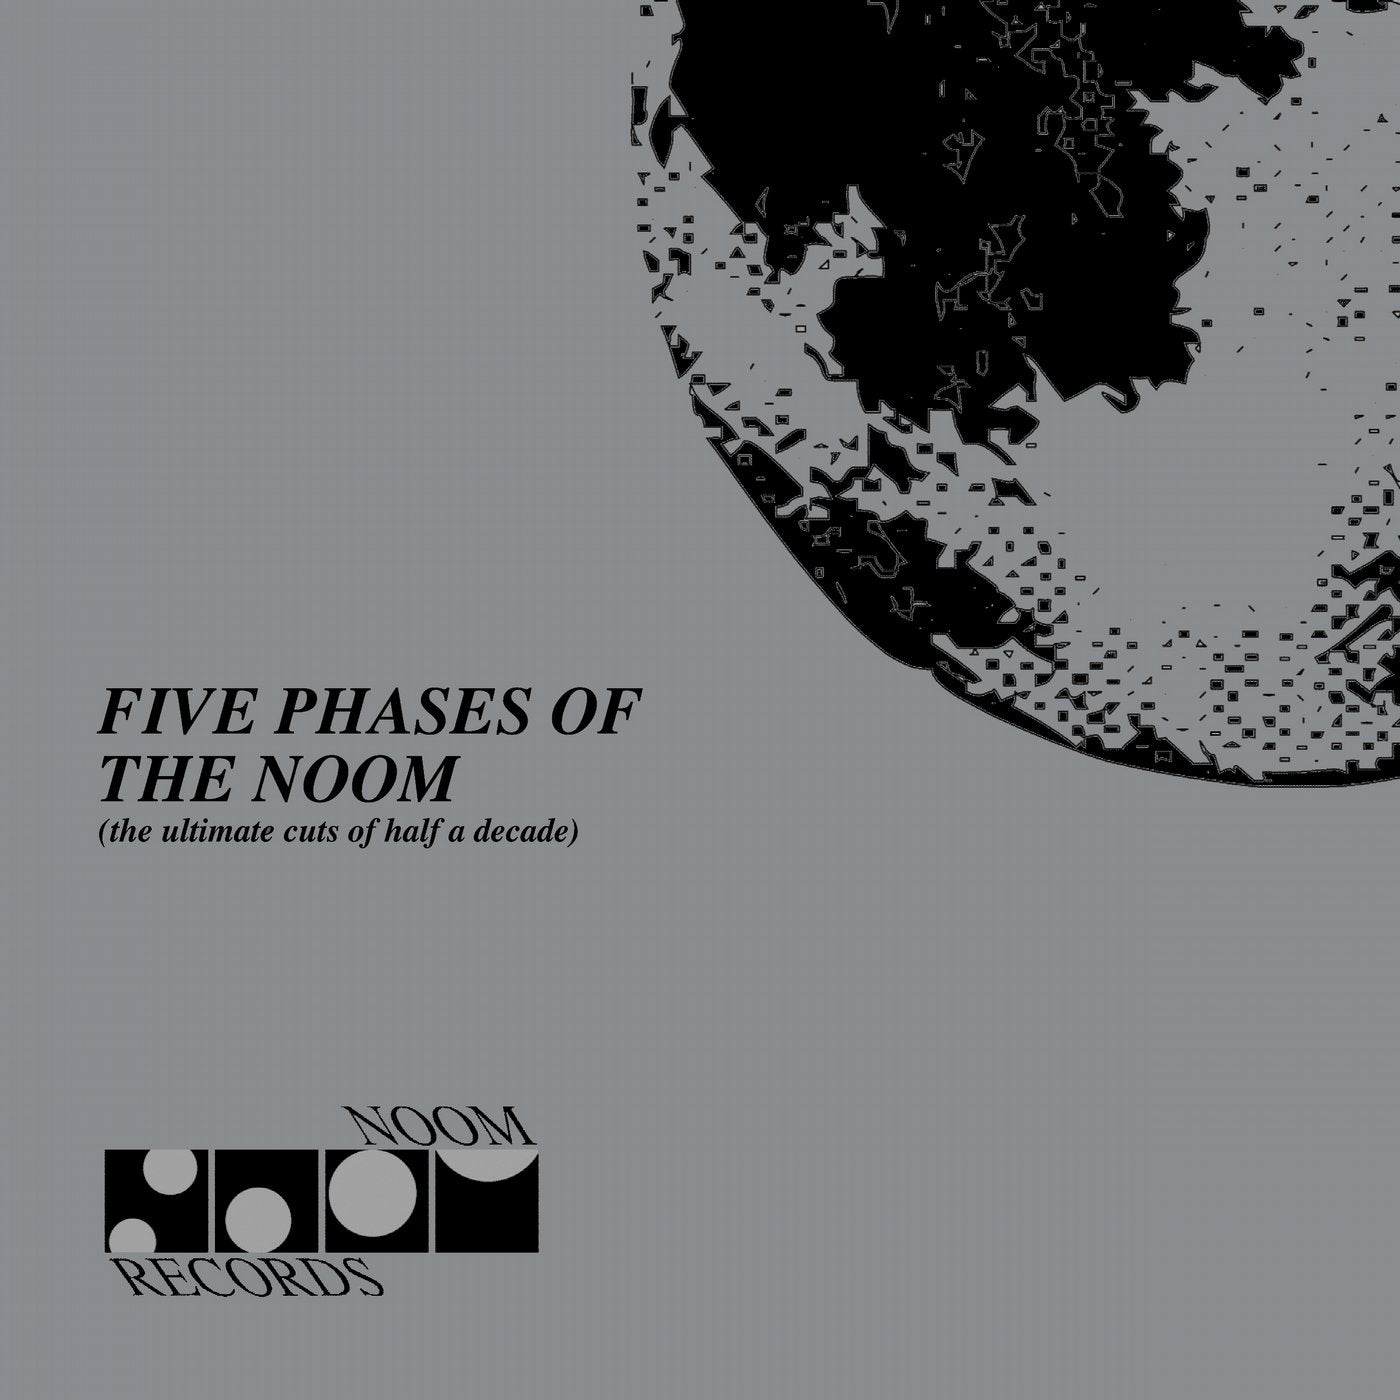 Five Phases of the Noom